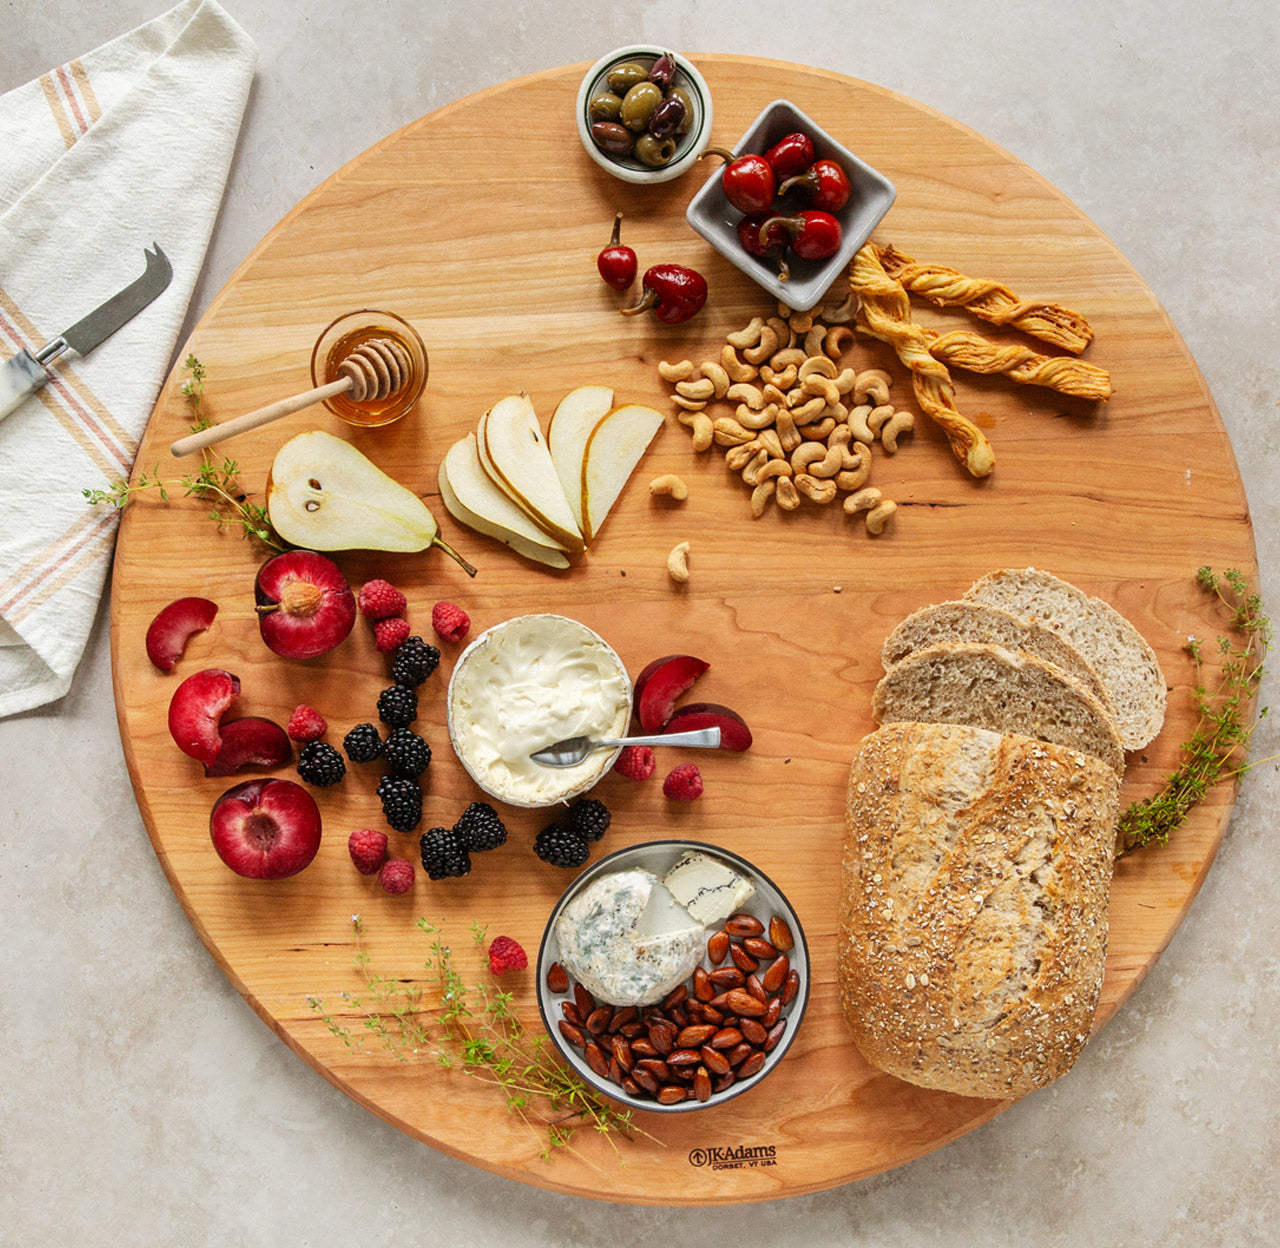 JK Adams large cherry cheese board with fruit, cheese, nuts and bread